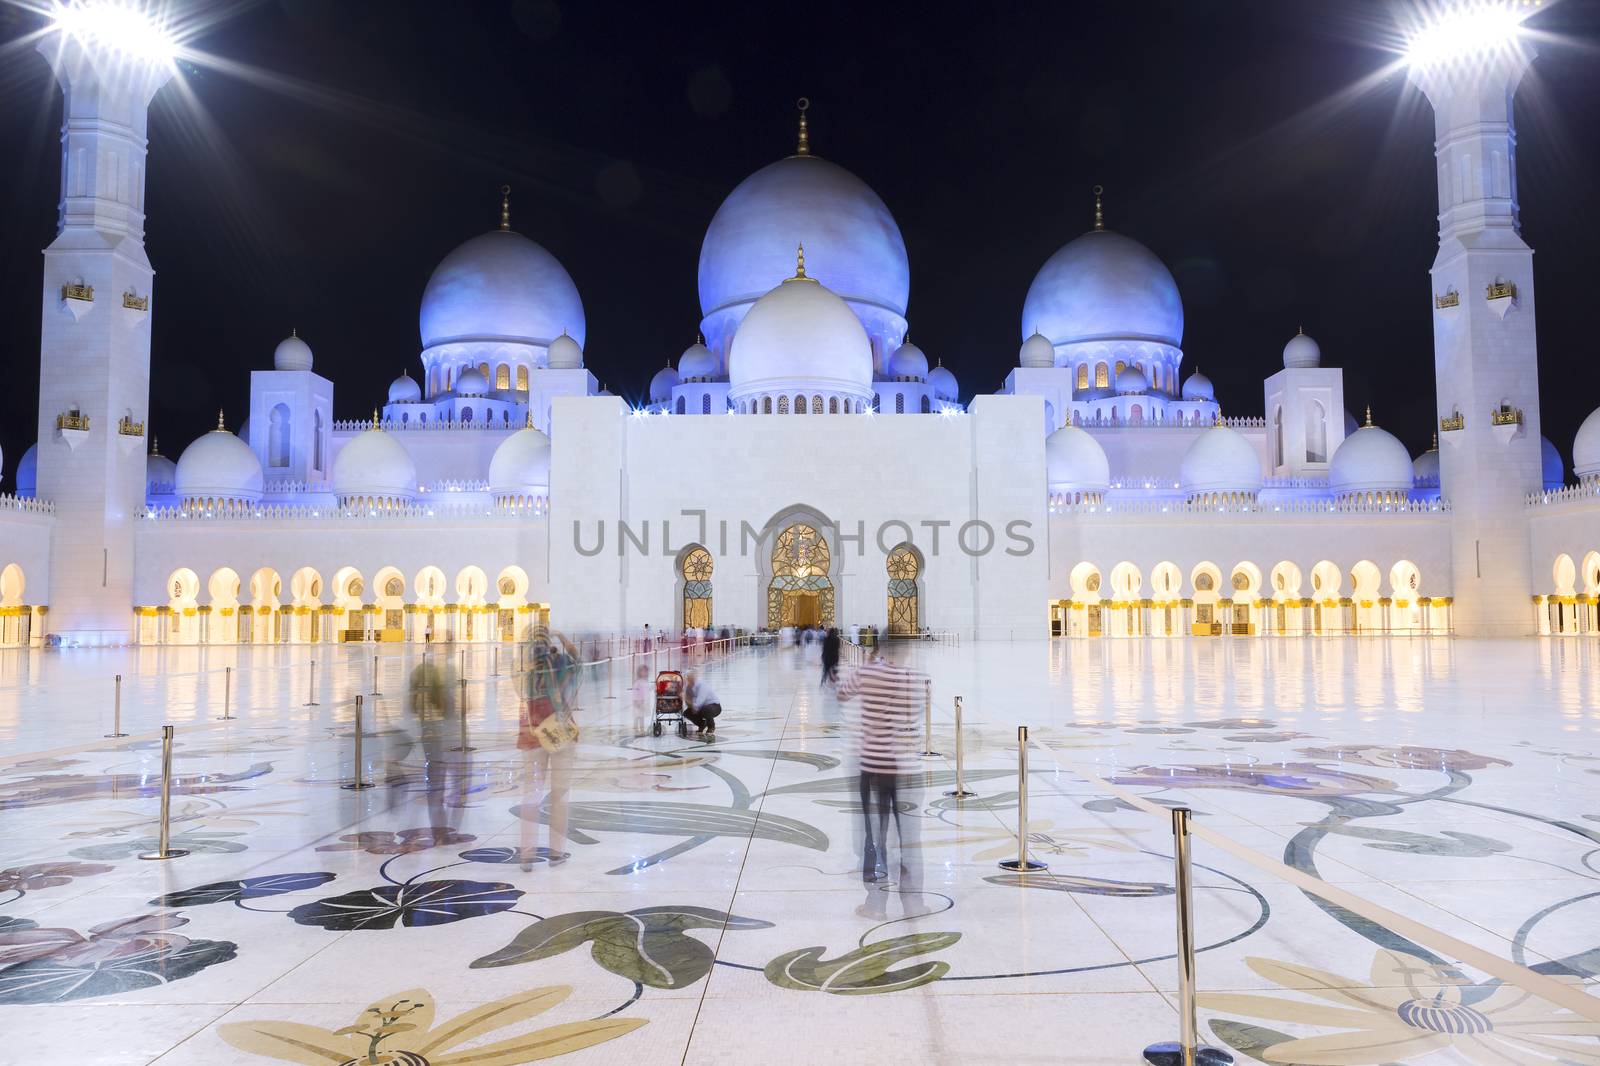 View in the famous Abu Dhabi Sheikh Zayed Mosque by night, UAE.